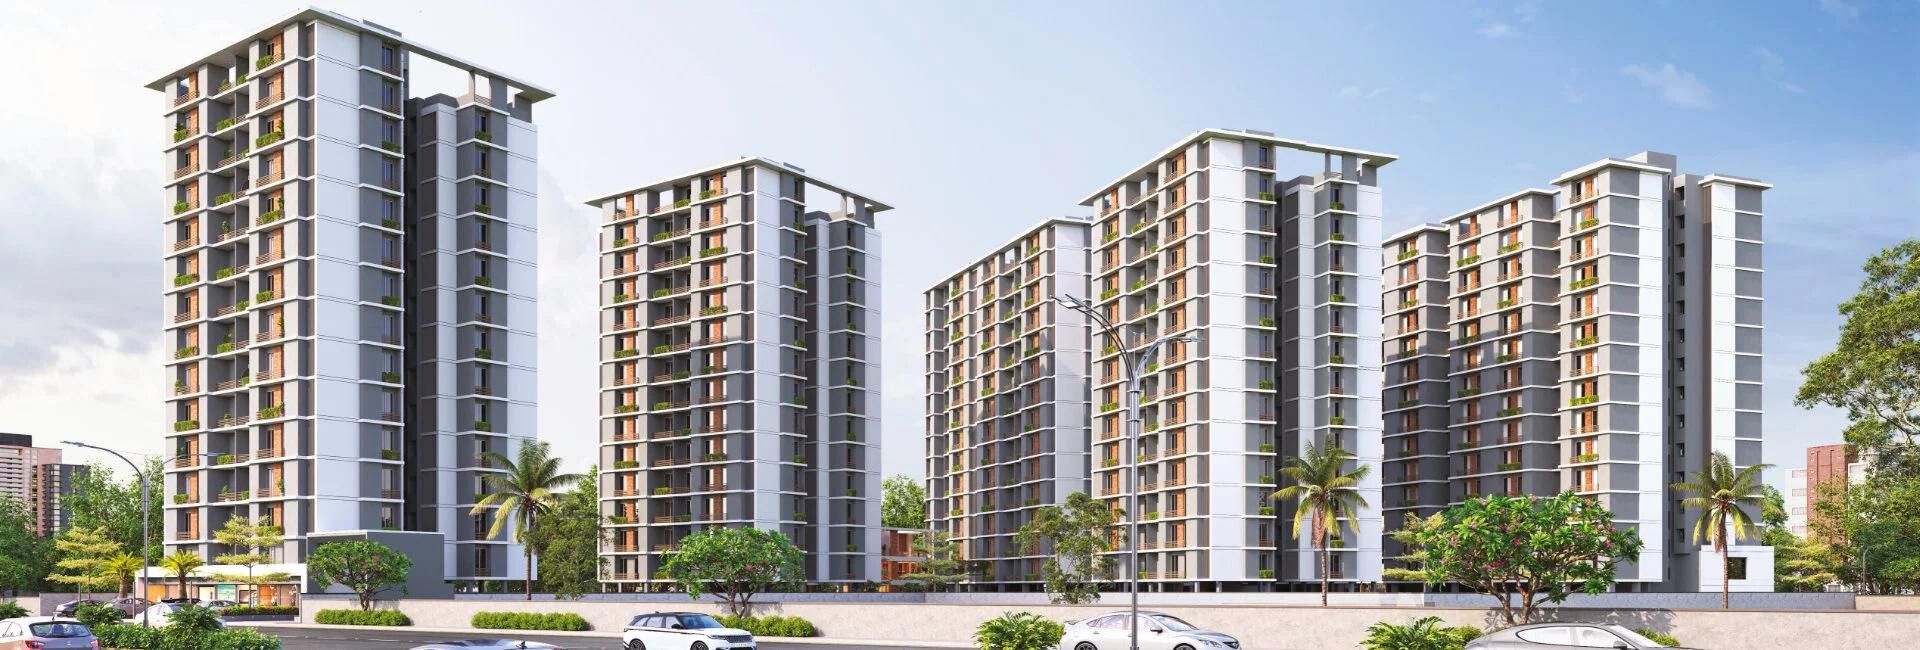 Experion Sector 48 Gurgaon – Ultra Luxurious Living